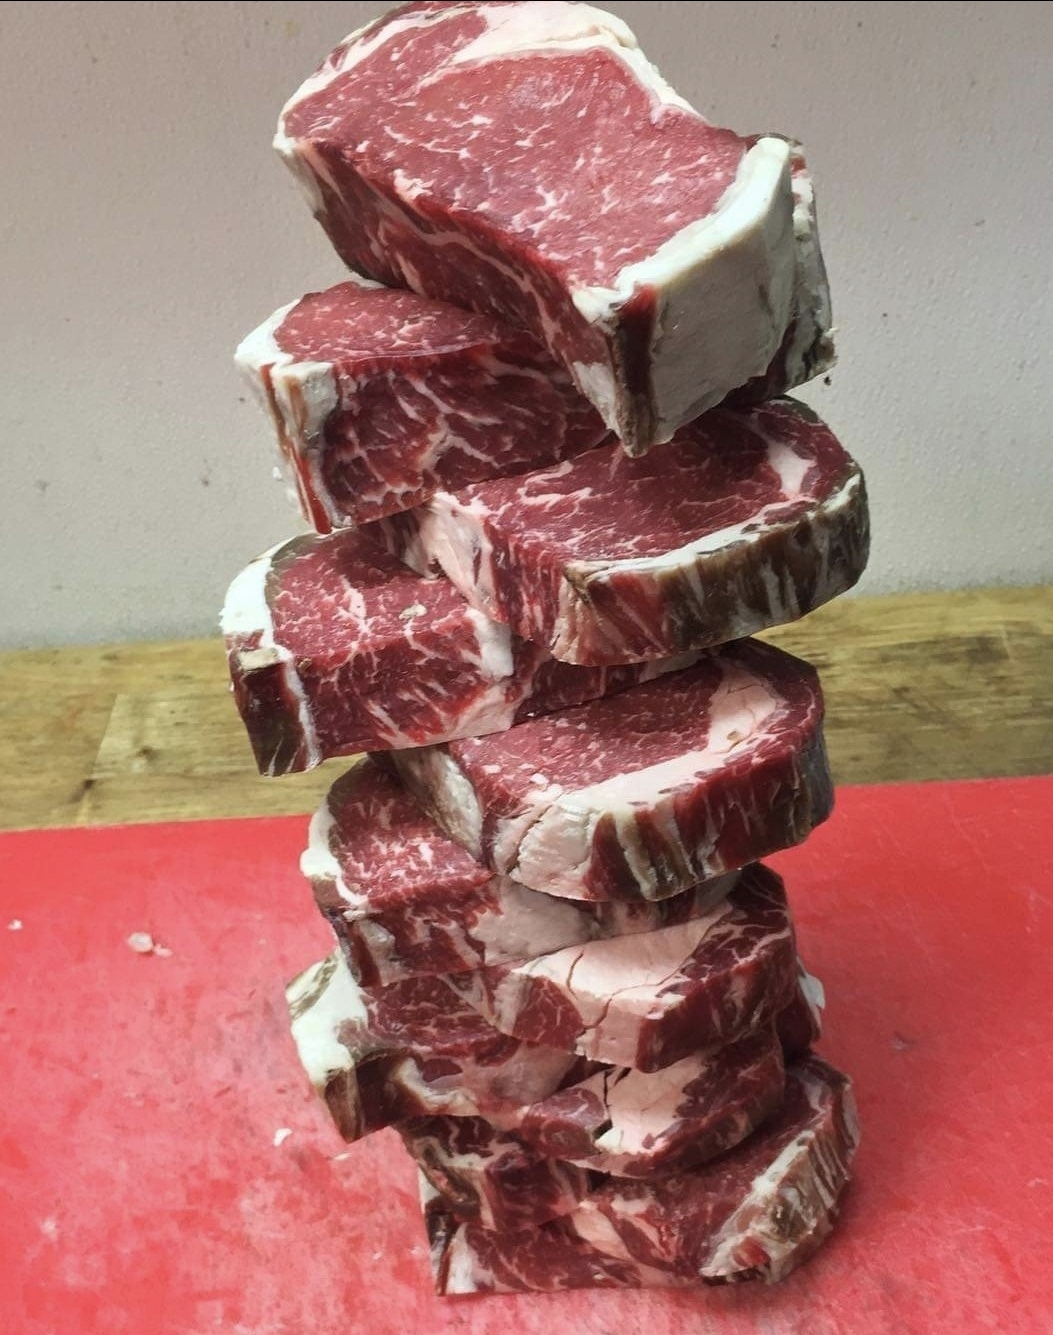 Leaning Tower of Prime, Dry Aged Meatza